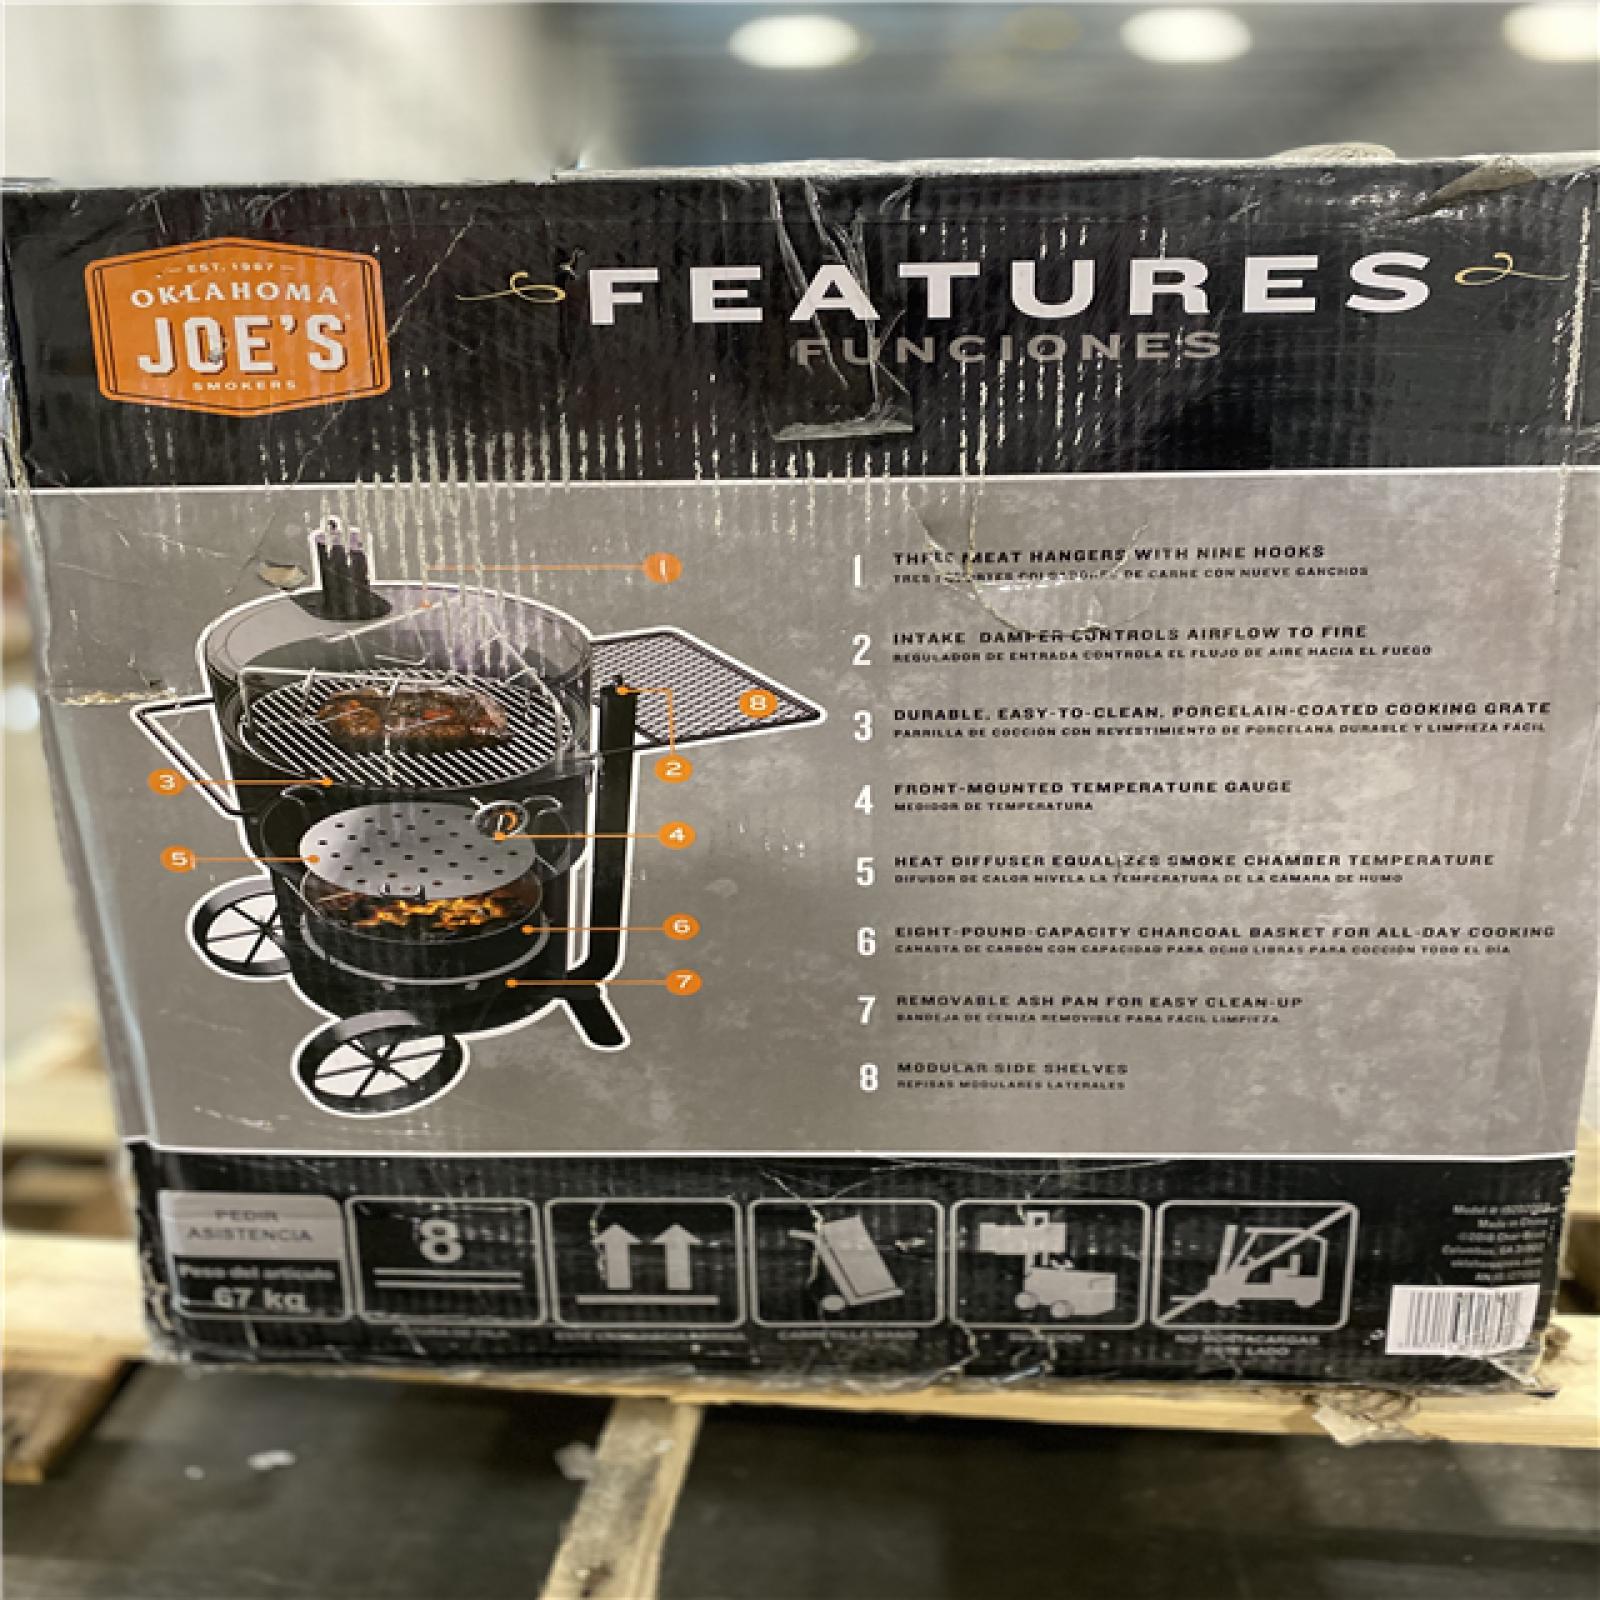 DALLAS LOCATION - NEW!  OKLAHOMA JOE'S Bronco Charcoal Drum Smoker Grill in Black with 284 sq. in. Cooking Space